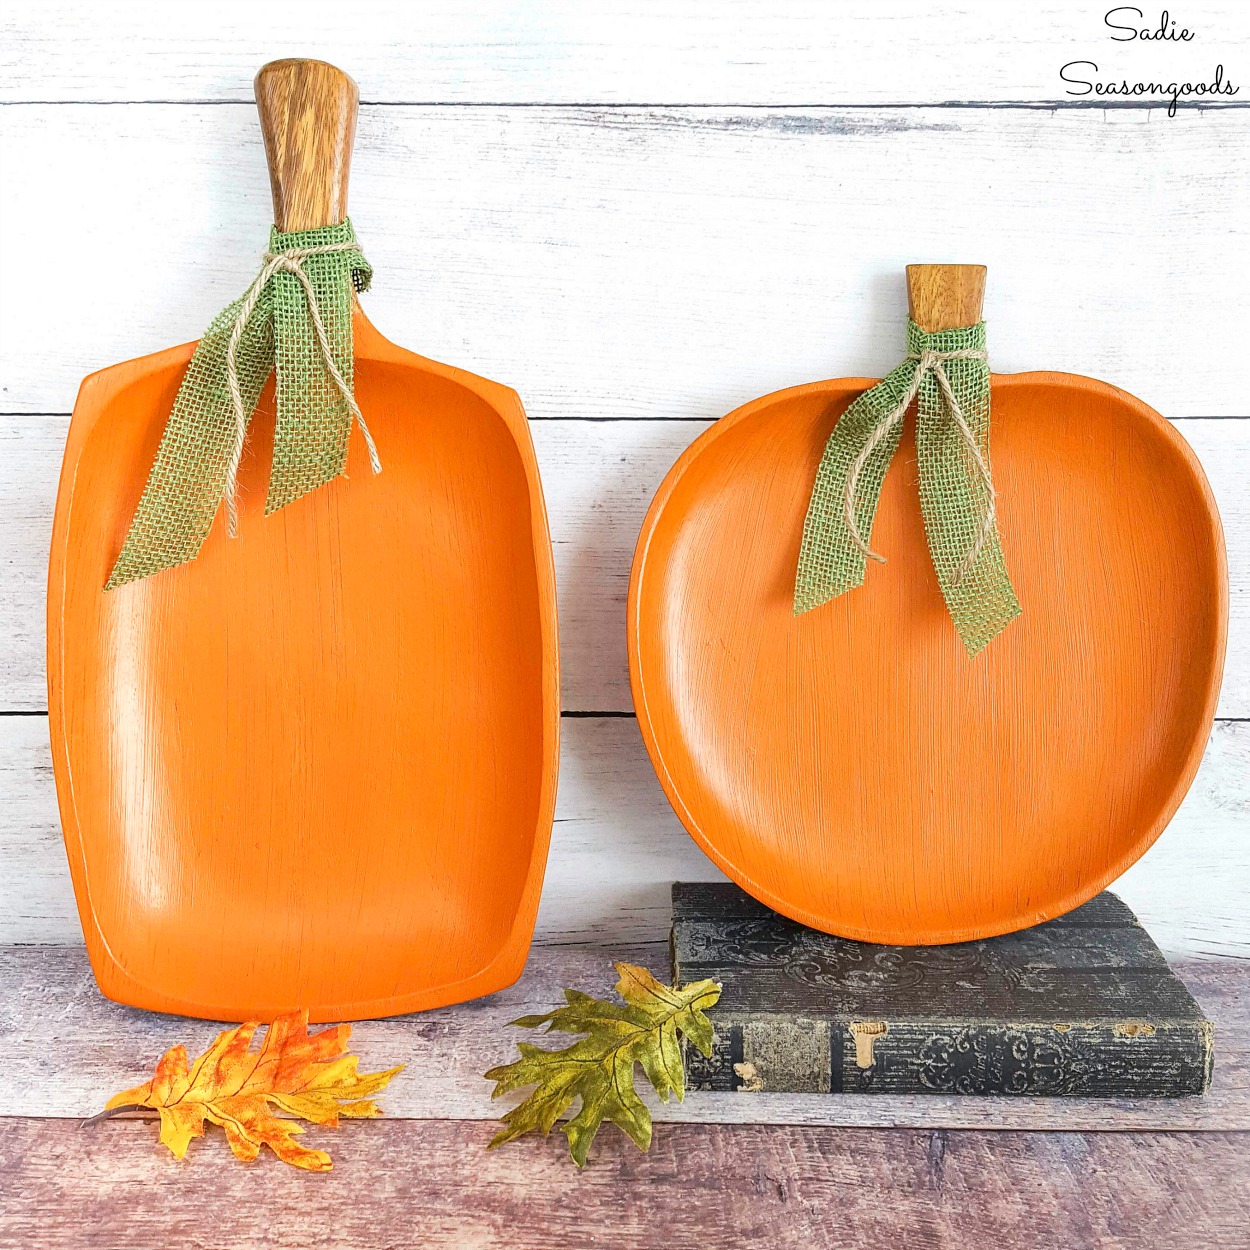 Painted wooden pumpkins from monkey pod wood for rustic fall decor